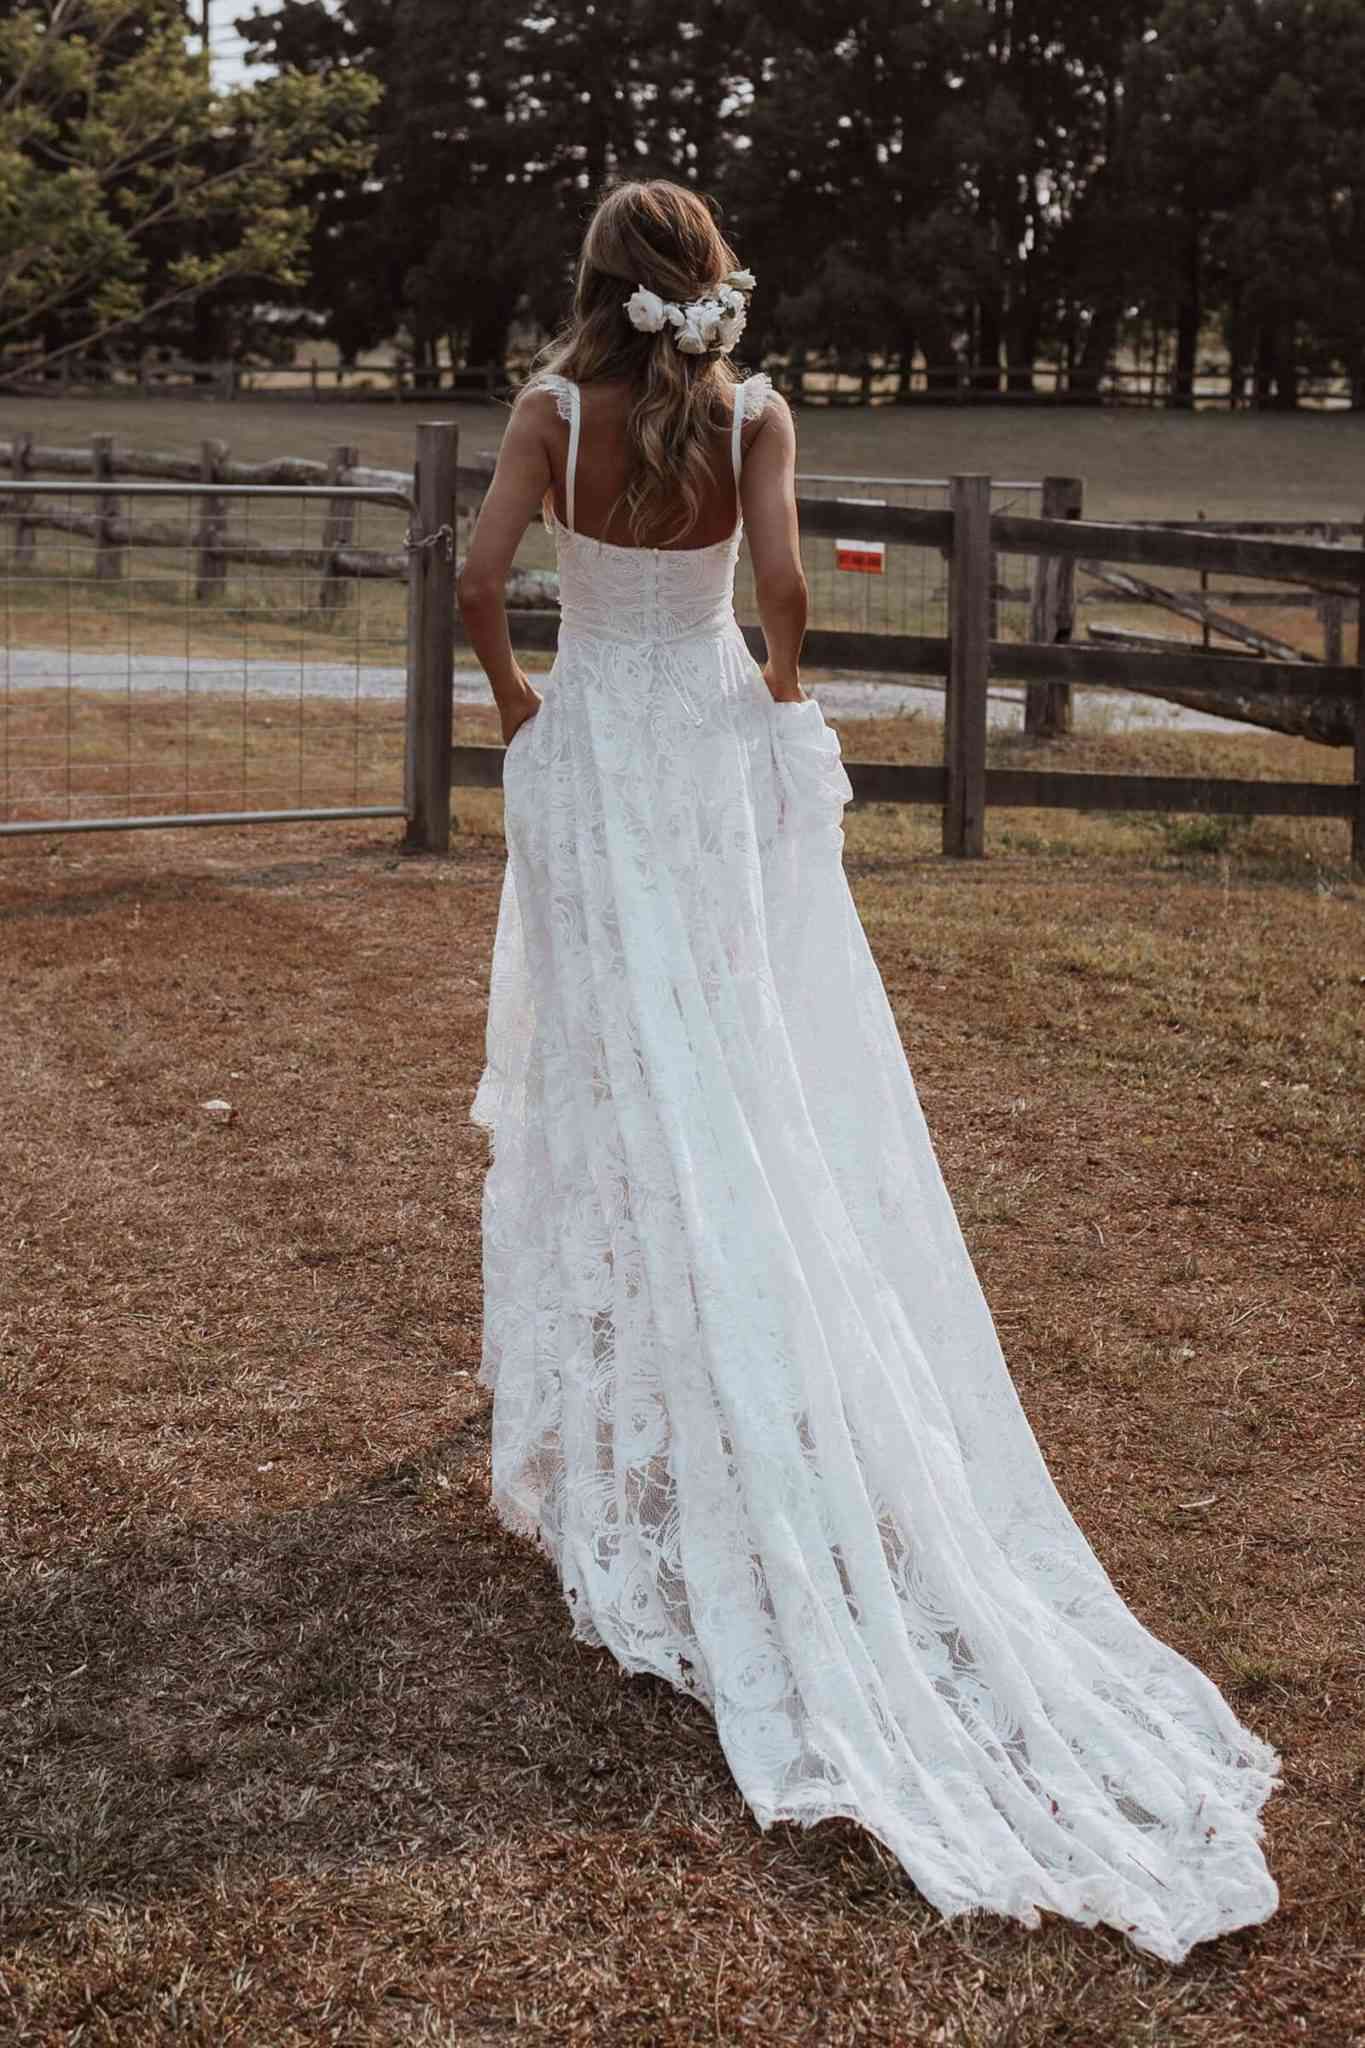 From Barns to Ballrooms: Rustic Country
Wedding Dresses